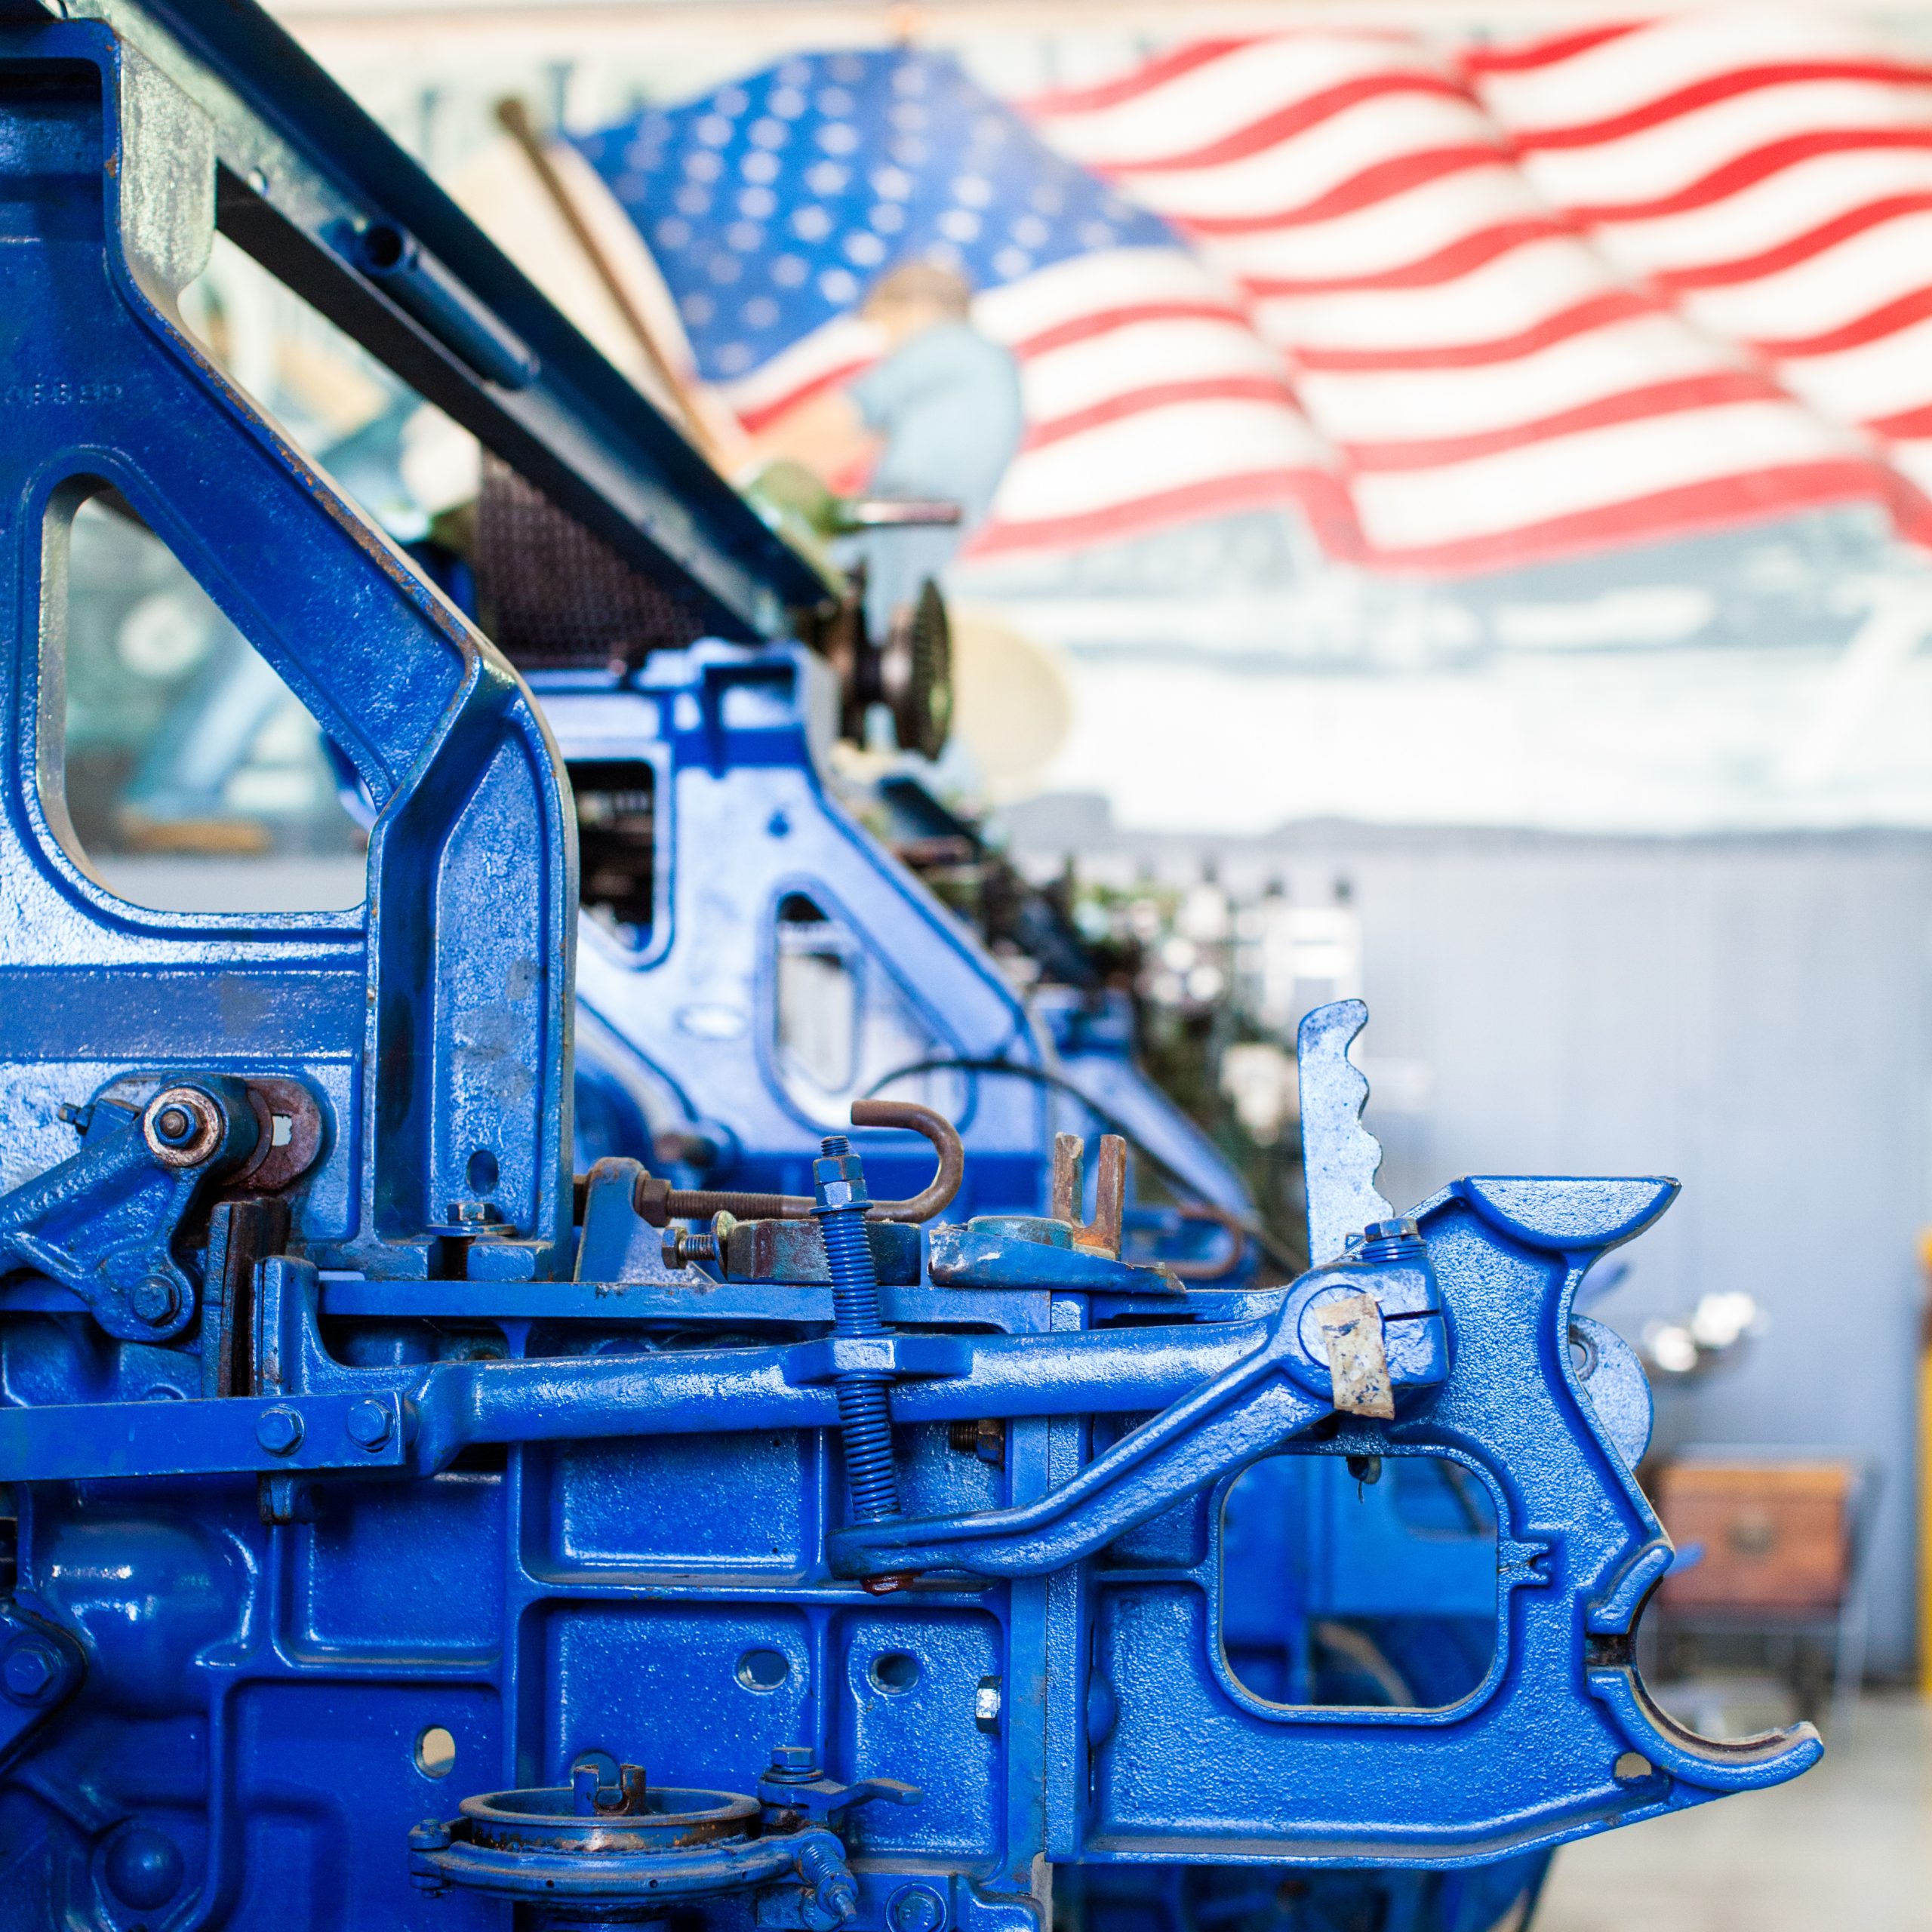 color-photography-with-blue-toyoda-industrial-loom-in-forefront-and-american-flag-worker-mural-in-background